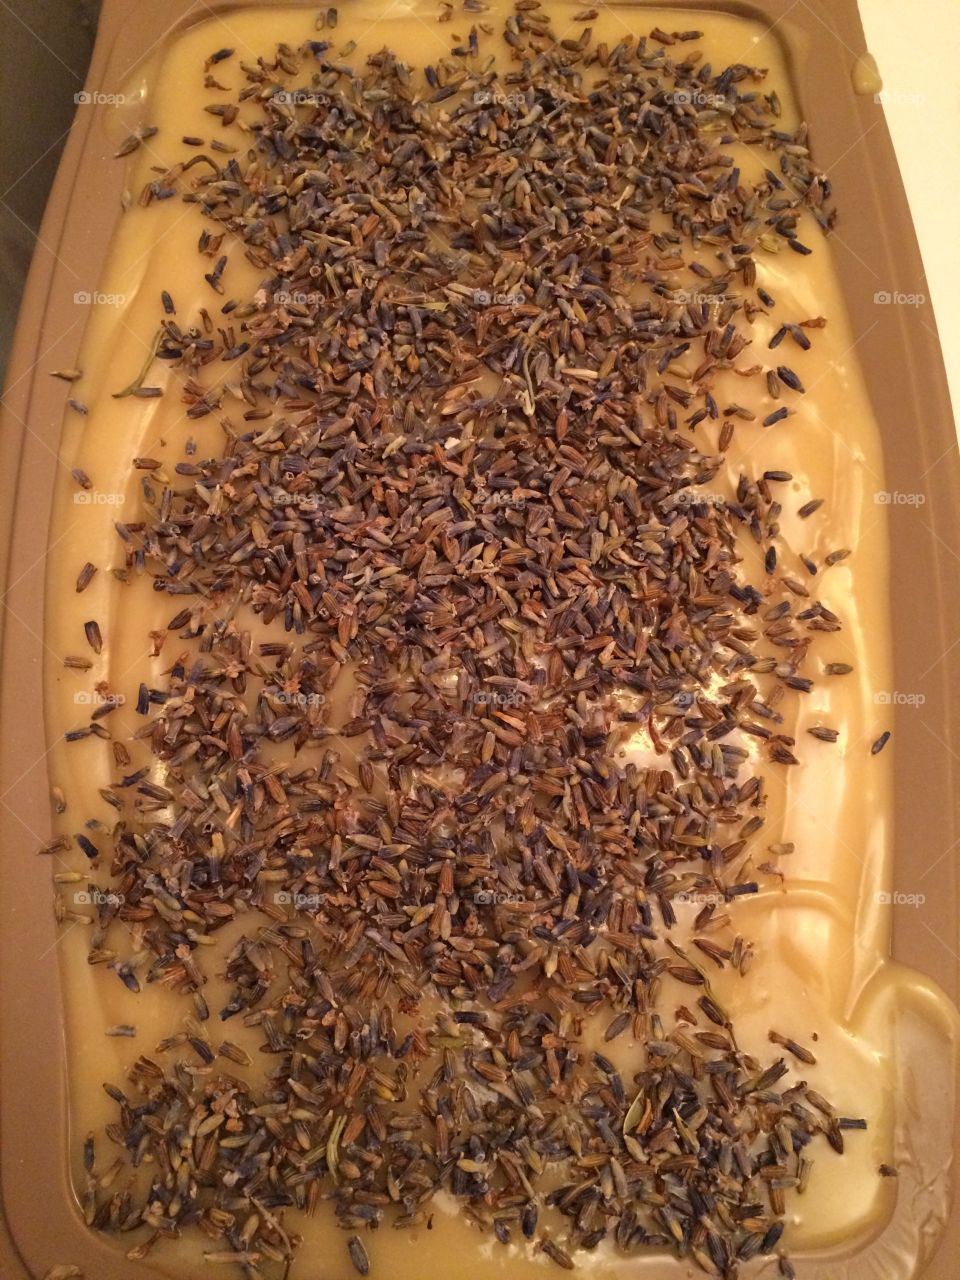 Lavender soap. I am a soap maker. These are some of my batches of soap